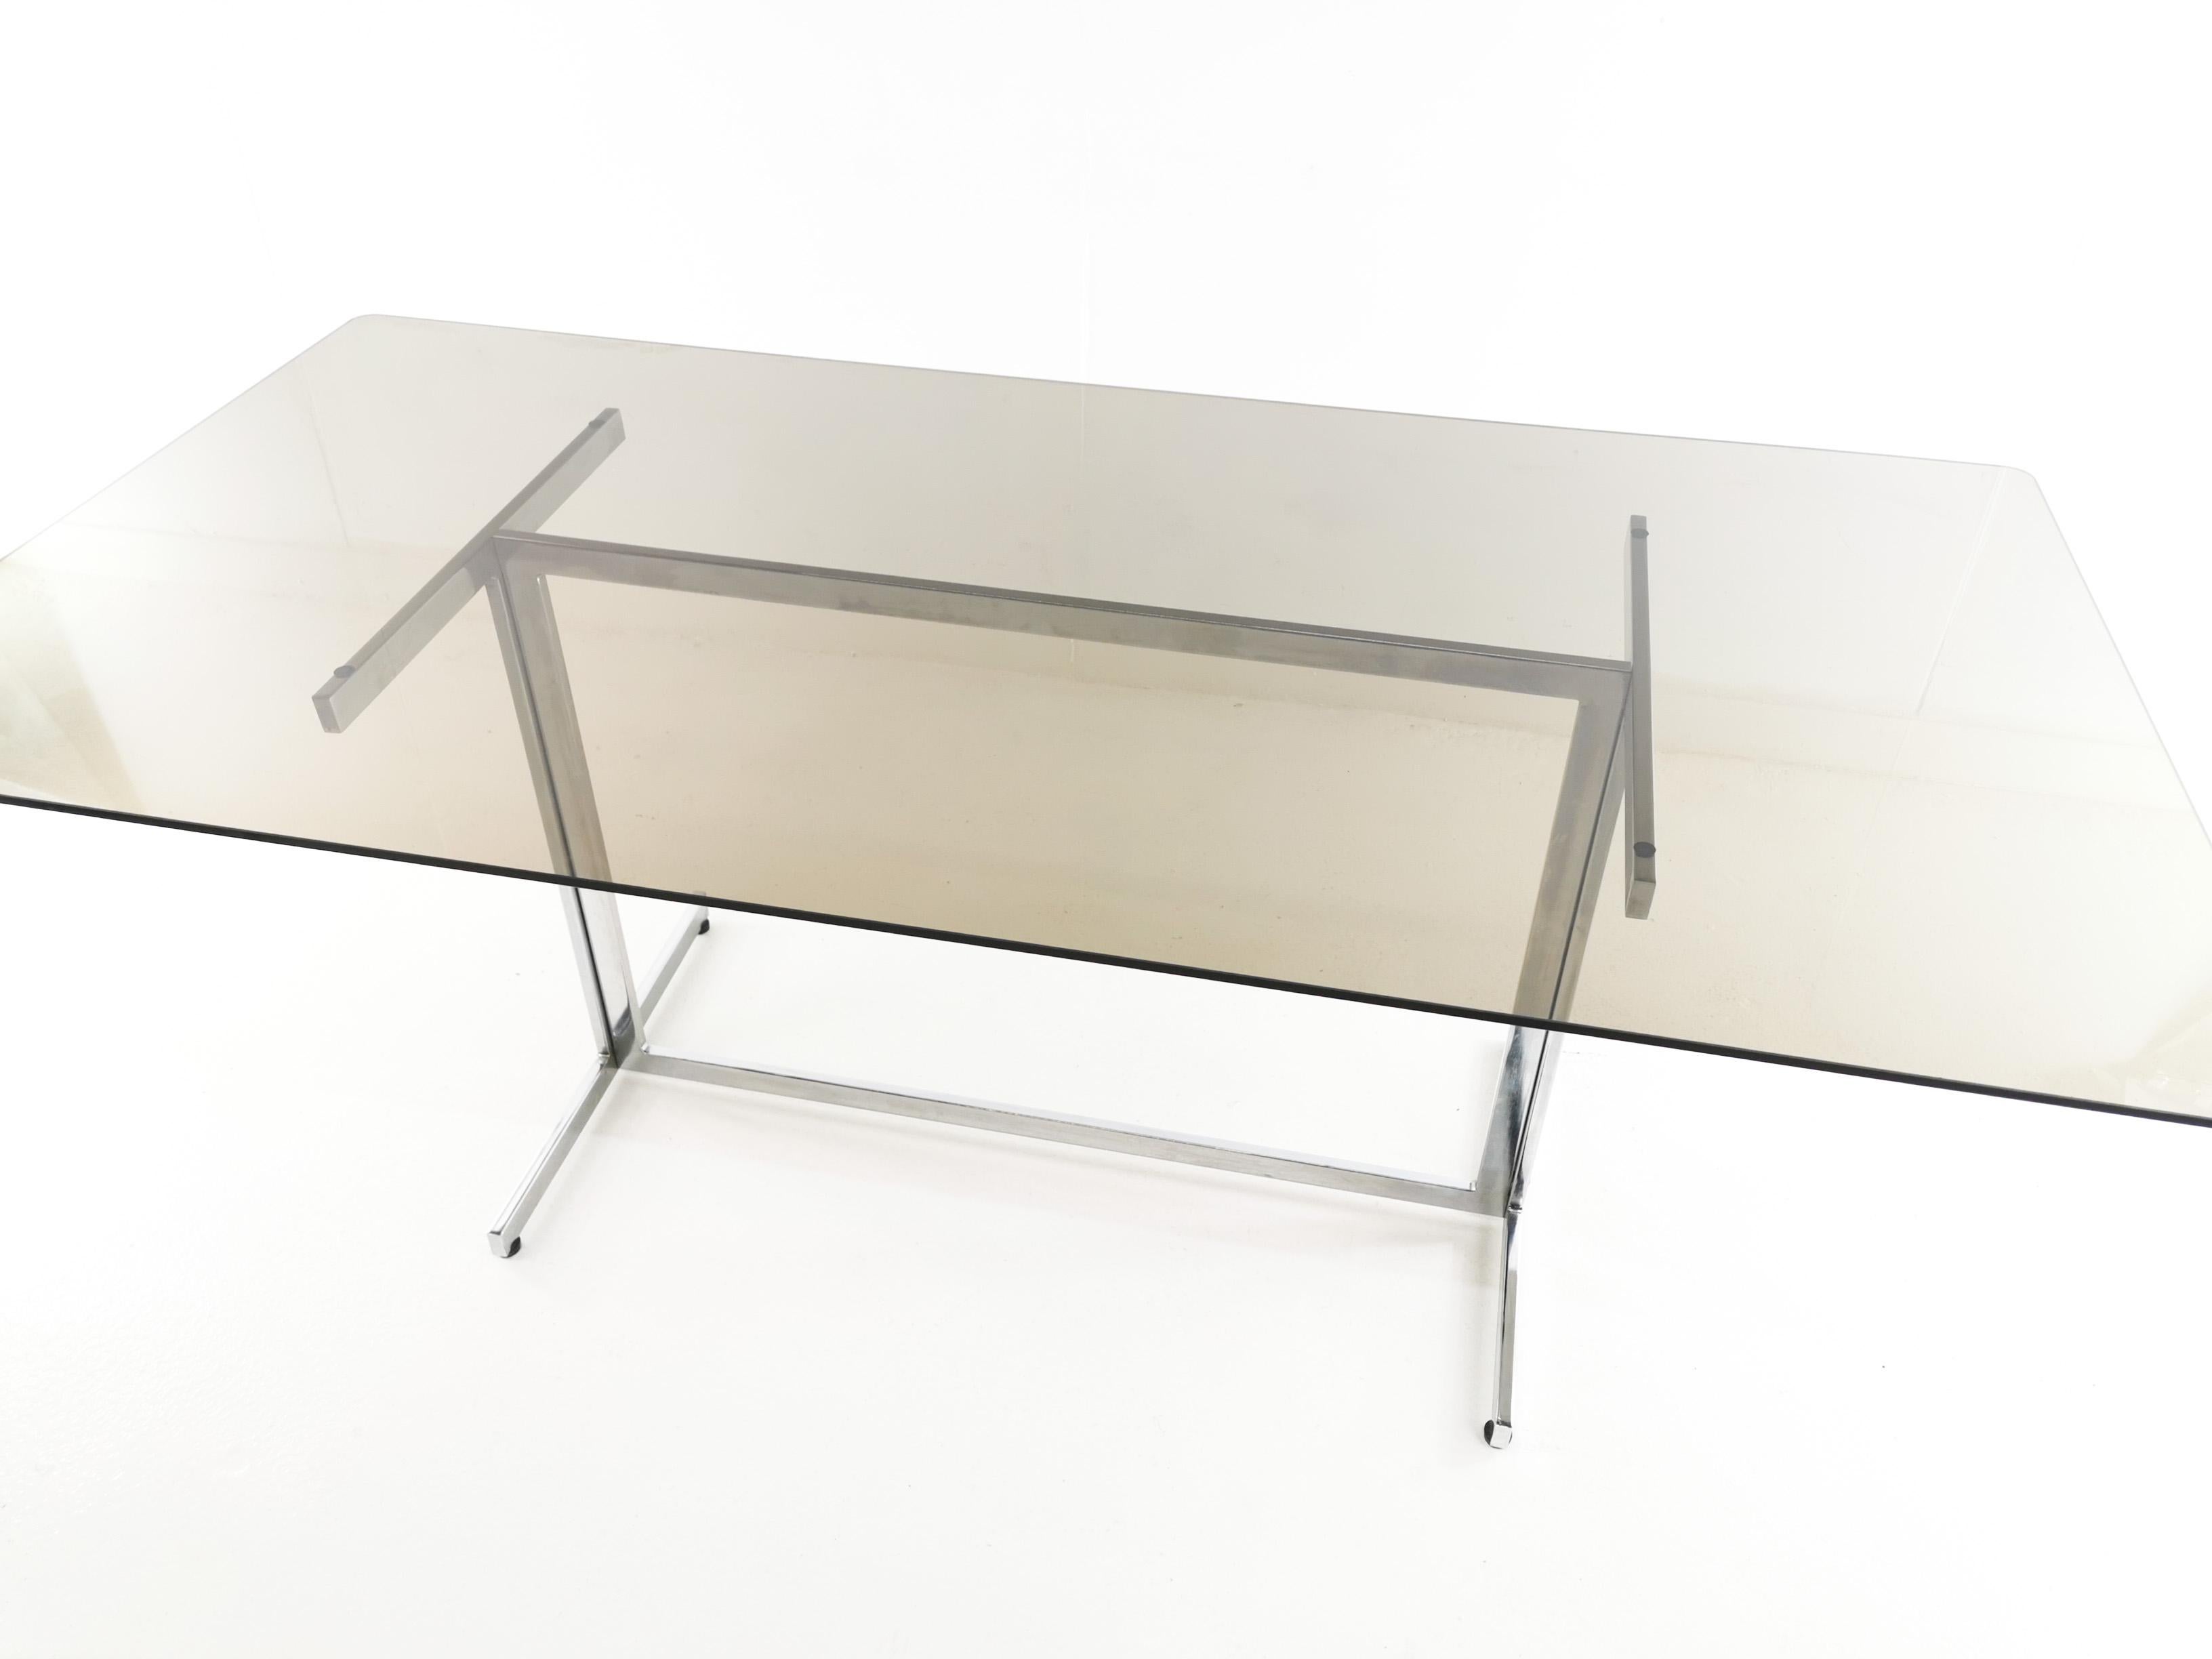 20th Century Tim Bates for Pieff Glass & Chrome Dining Table Desk Midcentury Vintage